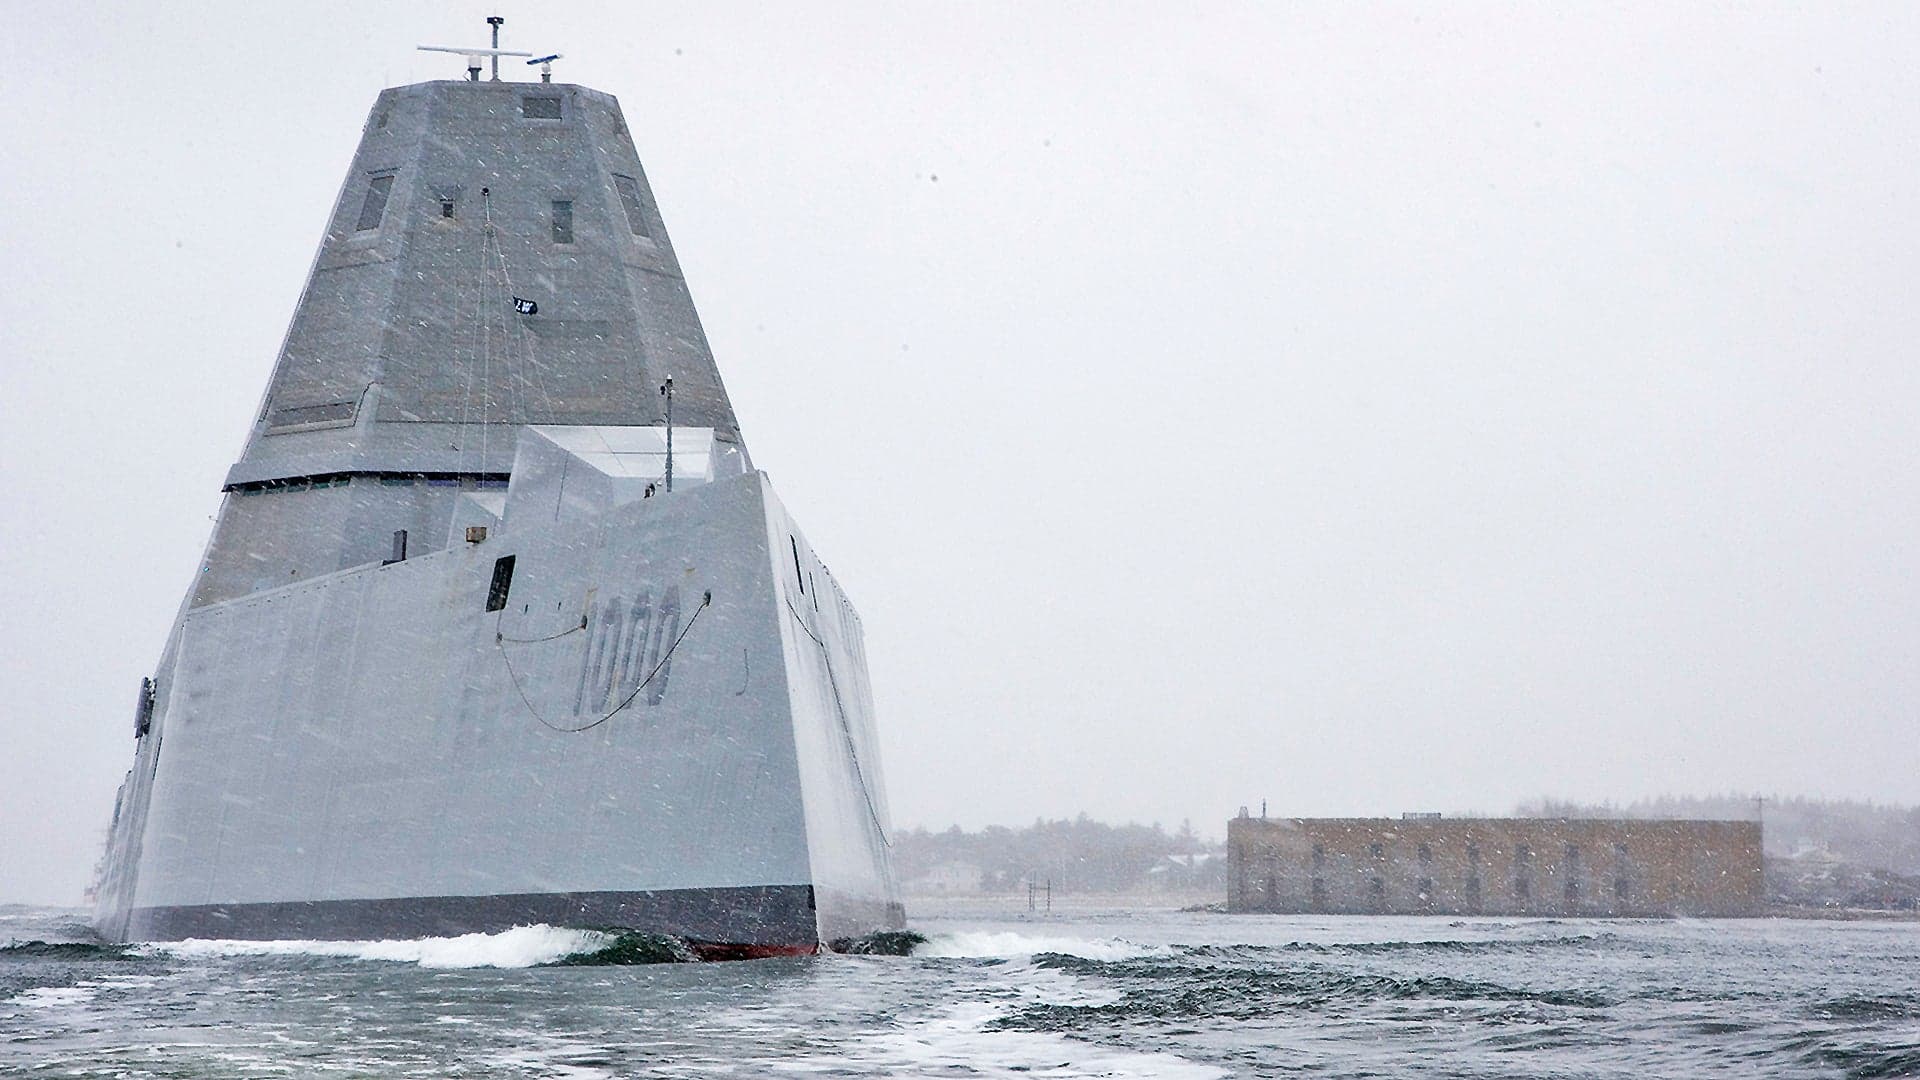 The Navy’s New Stealth Destroyer Has Watered Down Capabilities, Questionable Future